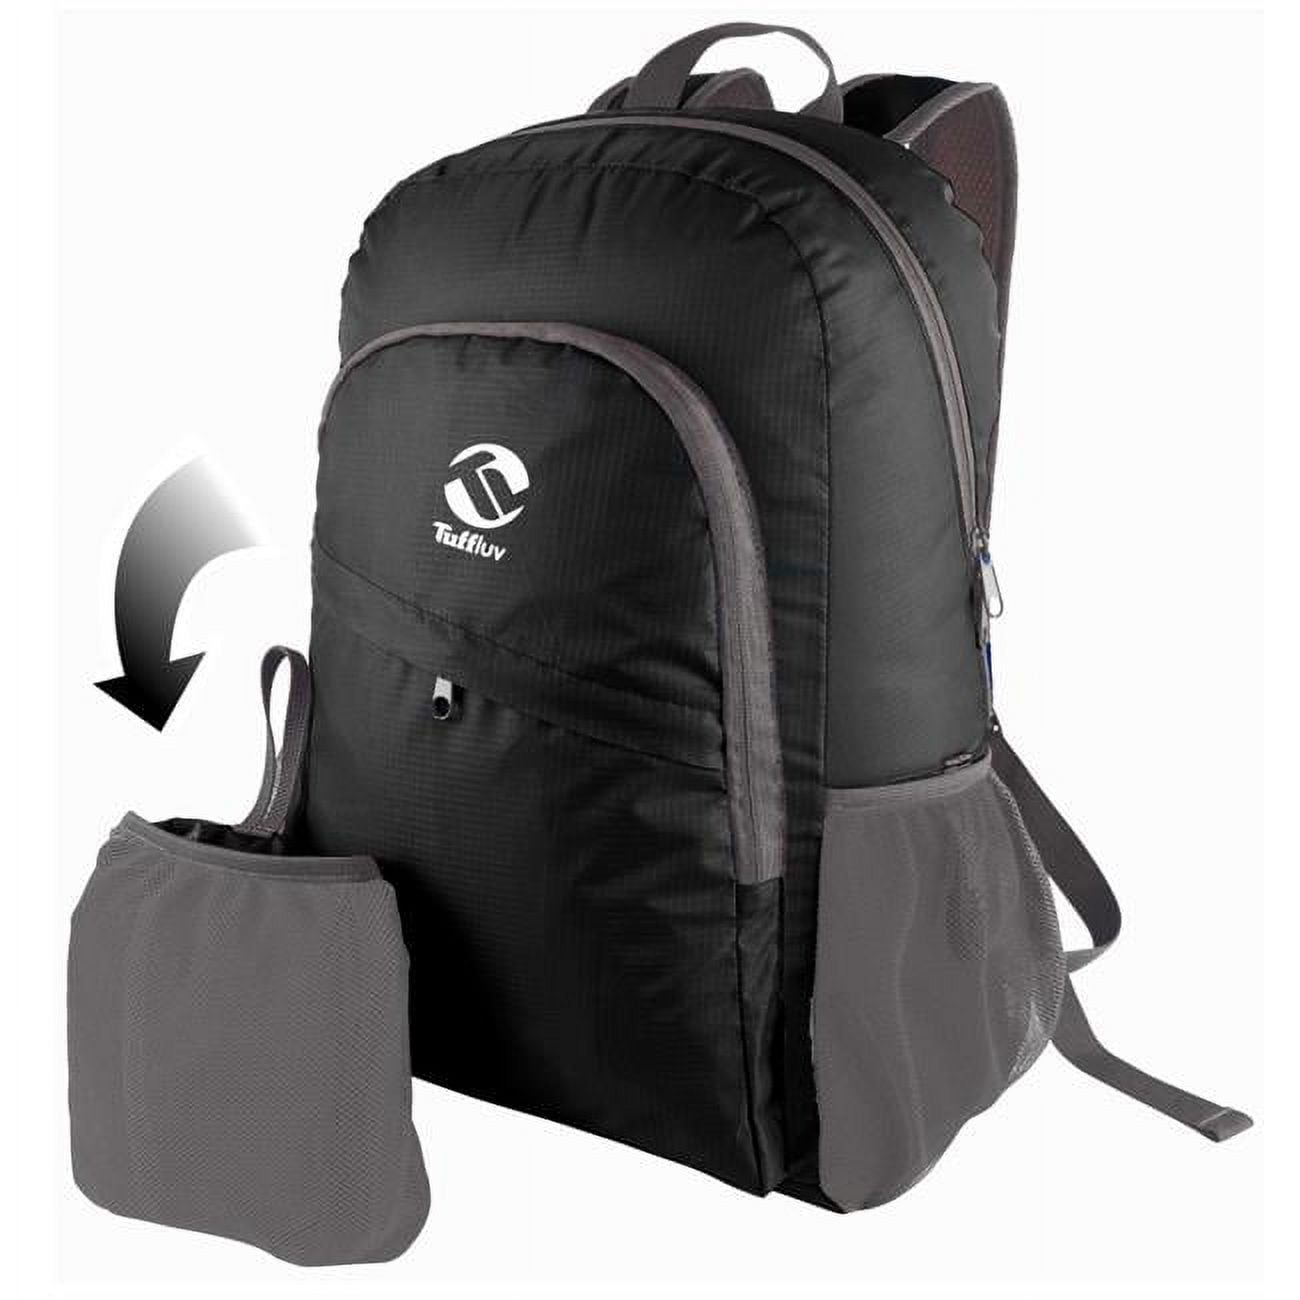 Tuff Luv A7-34 Feather Light Water Resistant Foldable Sport & Go Easy-travel Backpack, Black